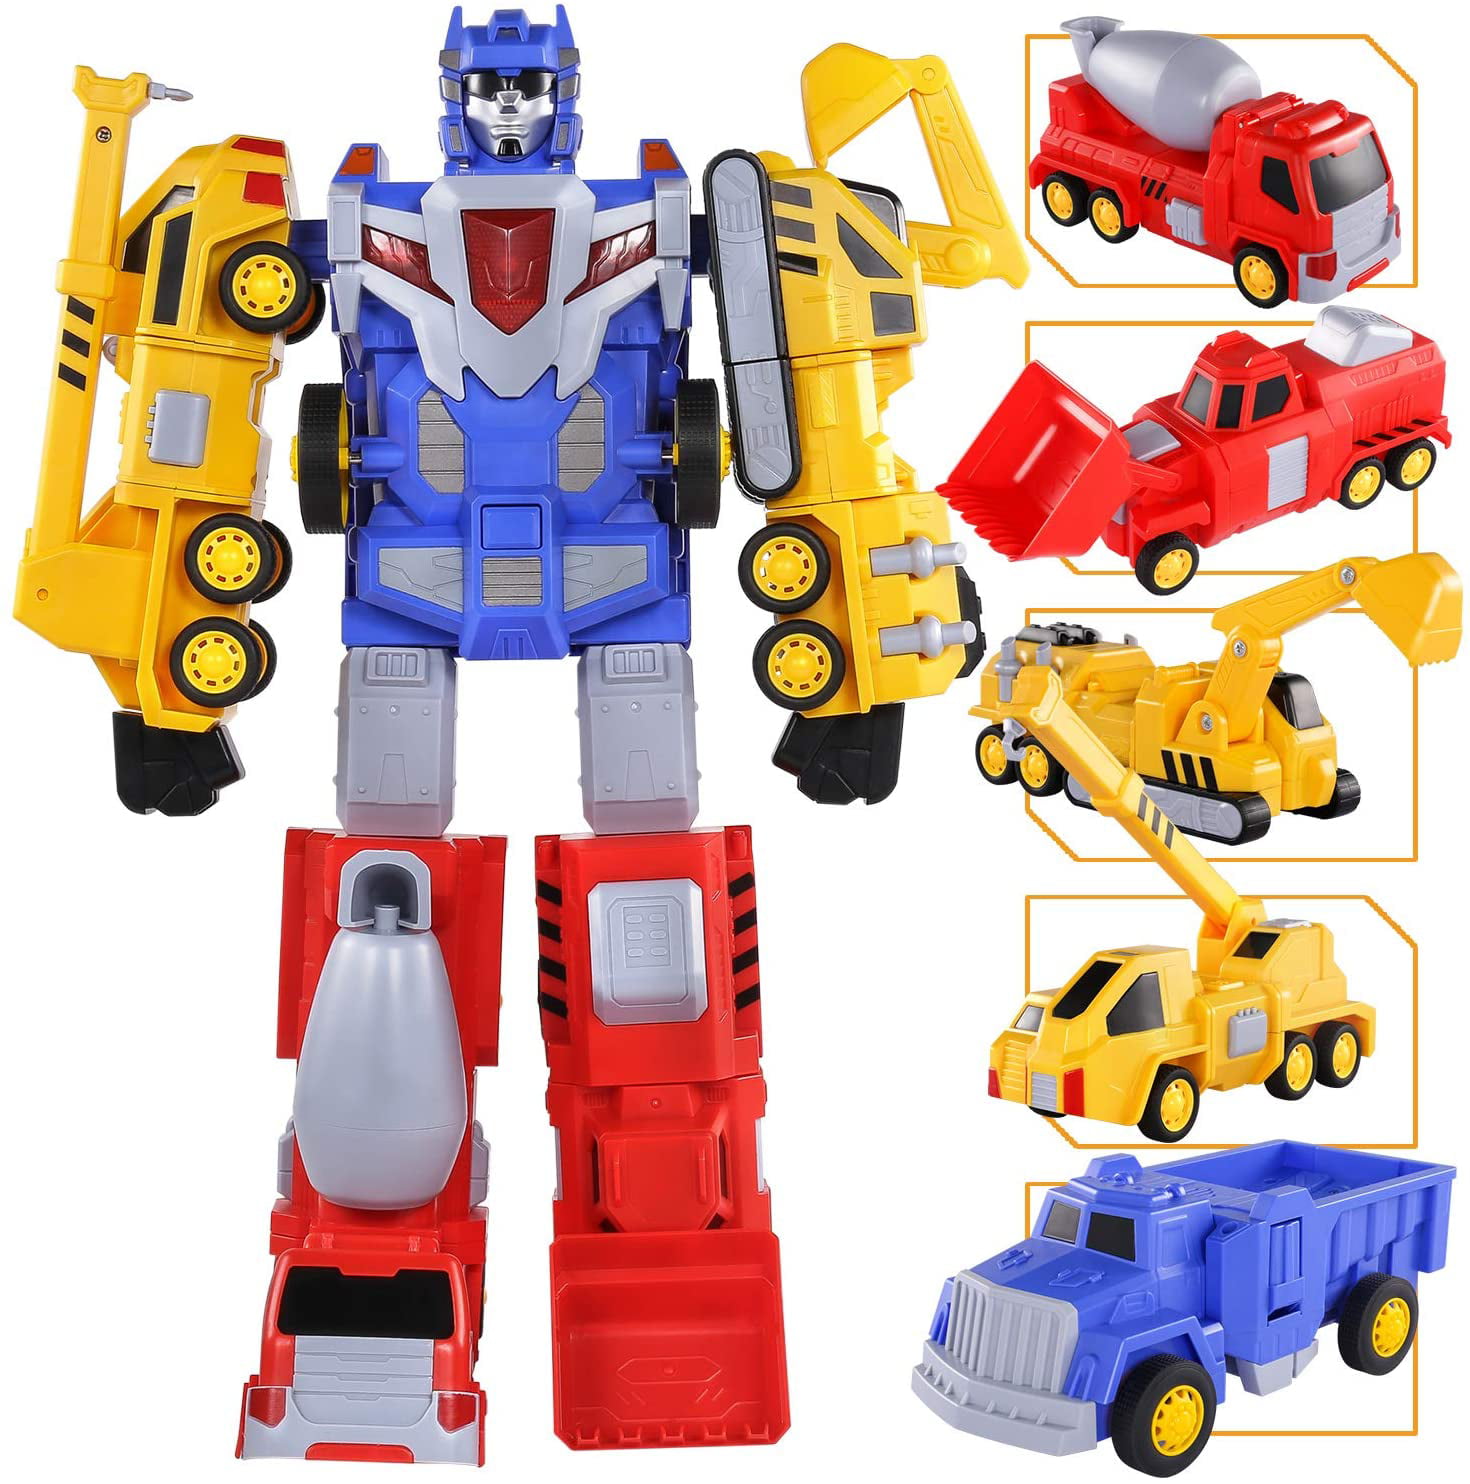 5 in 1 Transformers Robot Toys Take Apart Trucks Construction Building Car Toy Assembly Military Truck Vehicles Sets Stem Learning Toy Gift for 3 4 5 6 7 8 Years Old Kids Boys Girls Children 